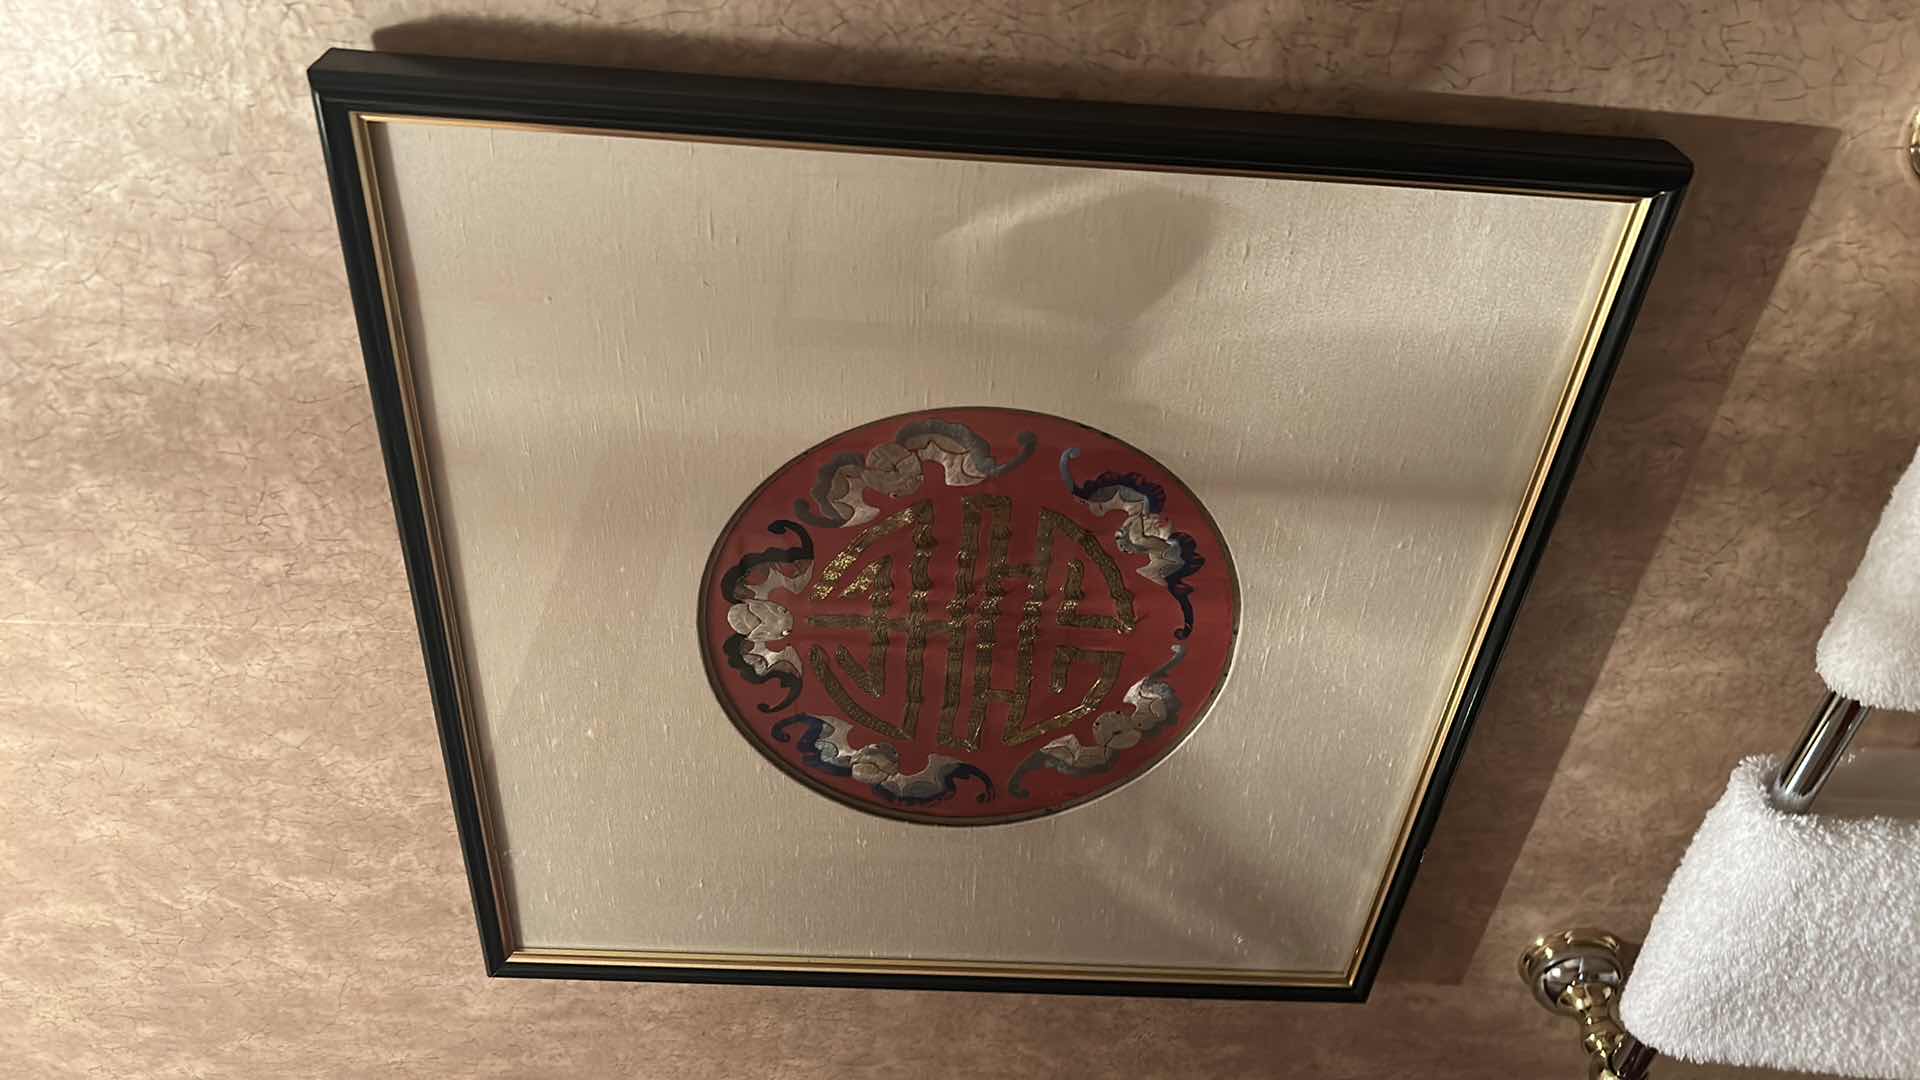 Photo 2 of ANTIQUE CHINESE TEXTILE FABRIC, SILK WITH SILK THREAD HAND EMBROIDERY ARTWORK FRAMED 18” x 18”